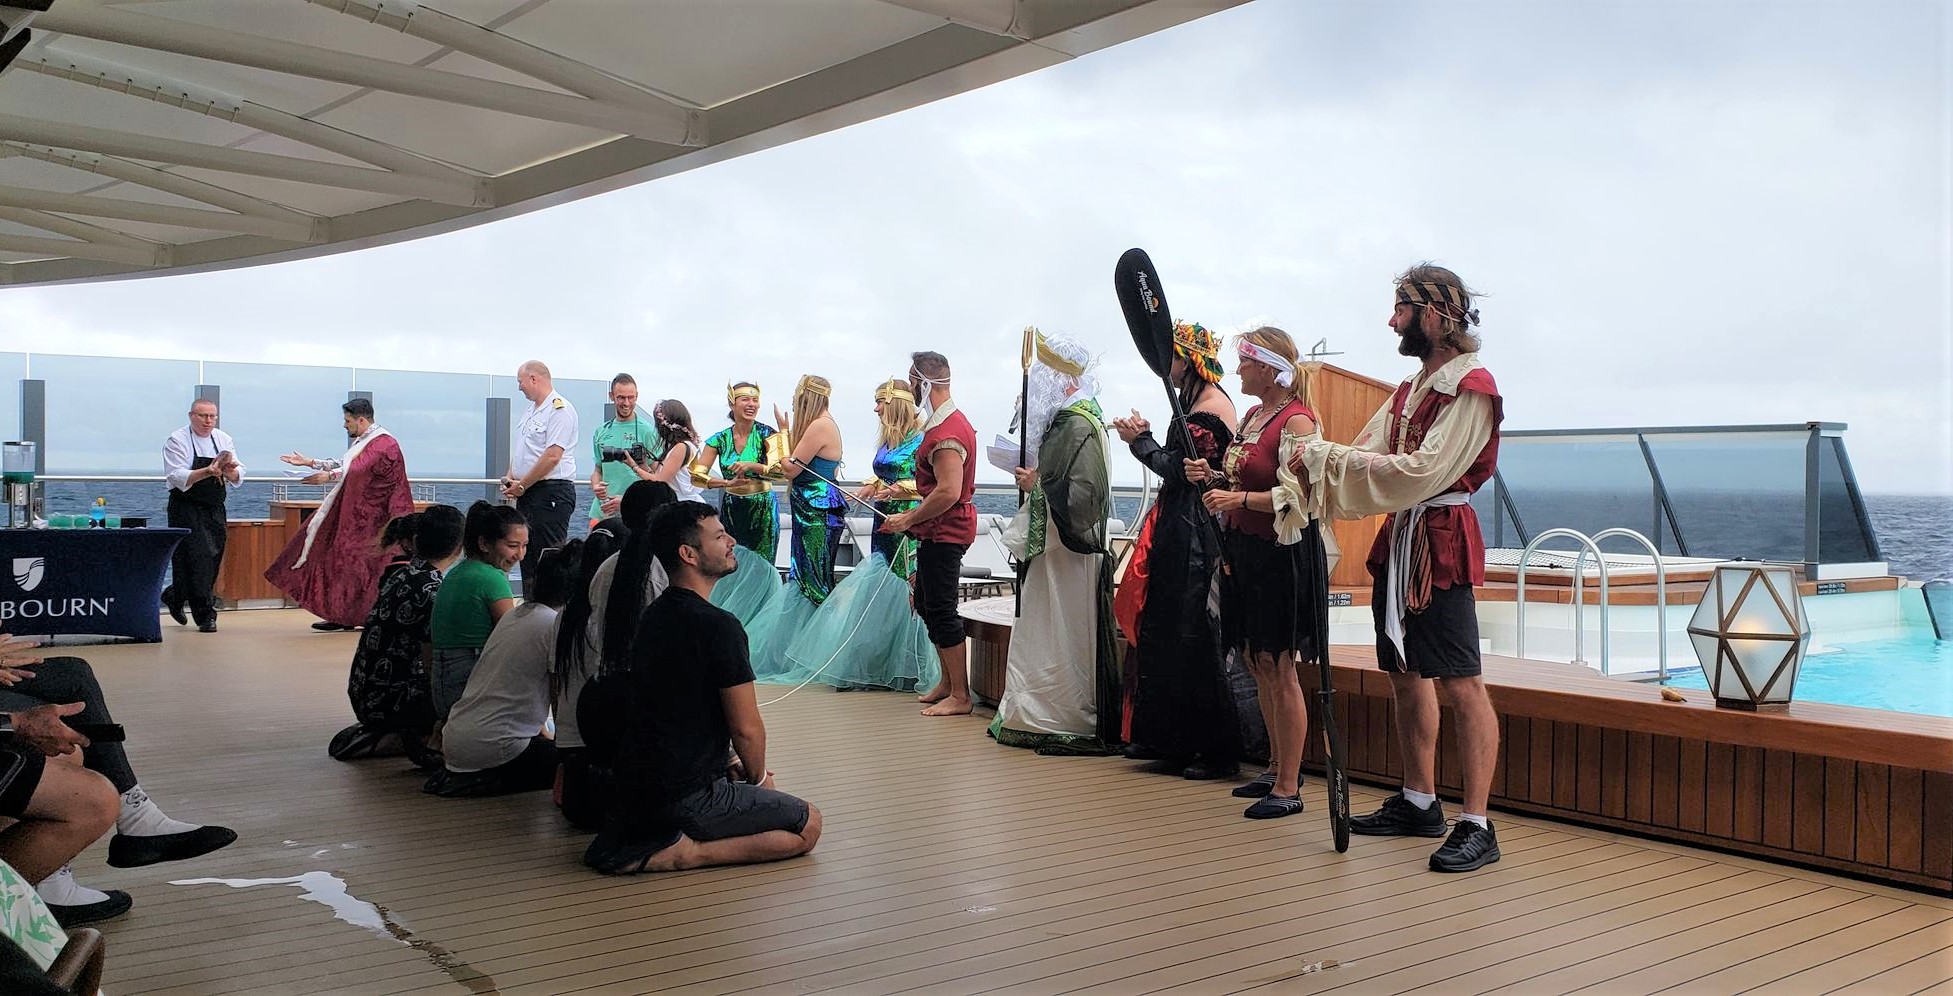 "Crossing the Equator" ceremony on Seabourn Venture shows how much room is available on an expedition ship, despite its smaller size. Photo by Susan J. Young.